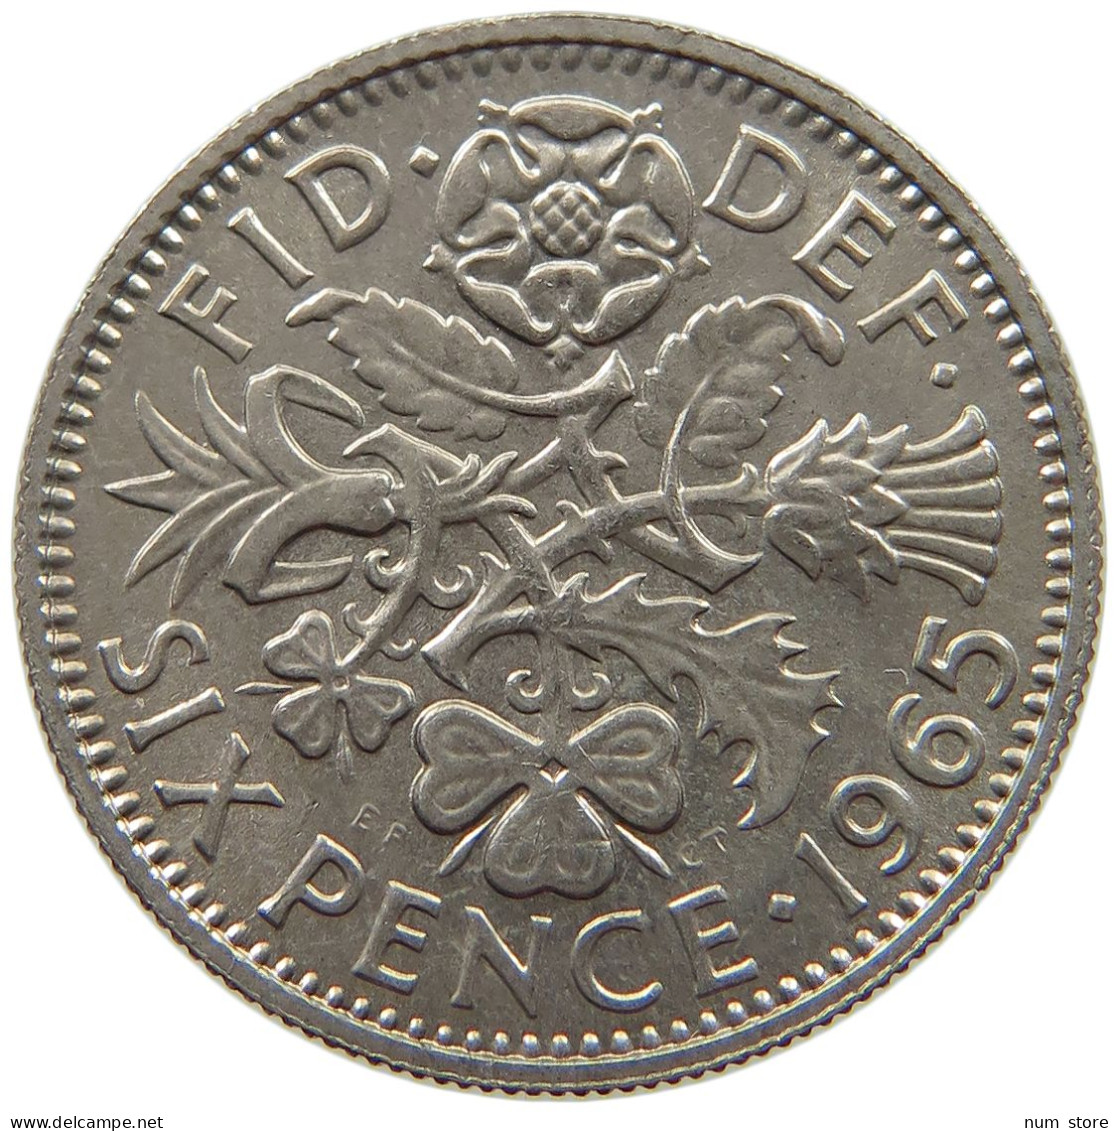 GREAT BRITAIN SIXPENCE 1965 TOP #s064 0541 - H. 6 Pence